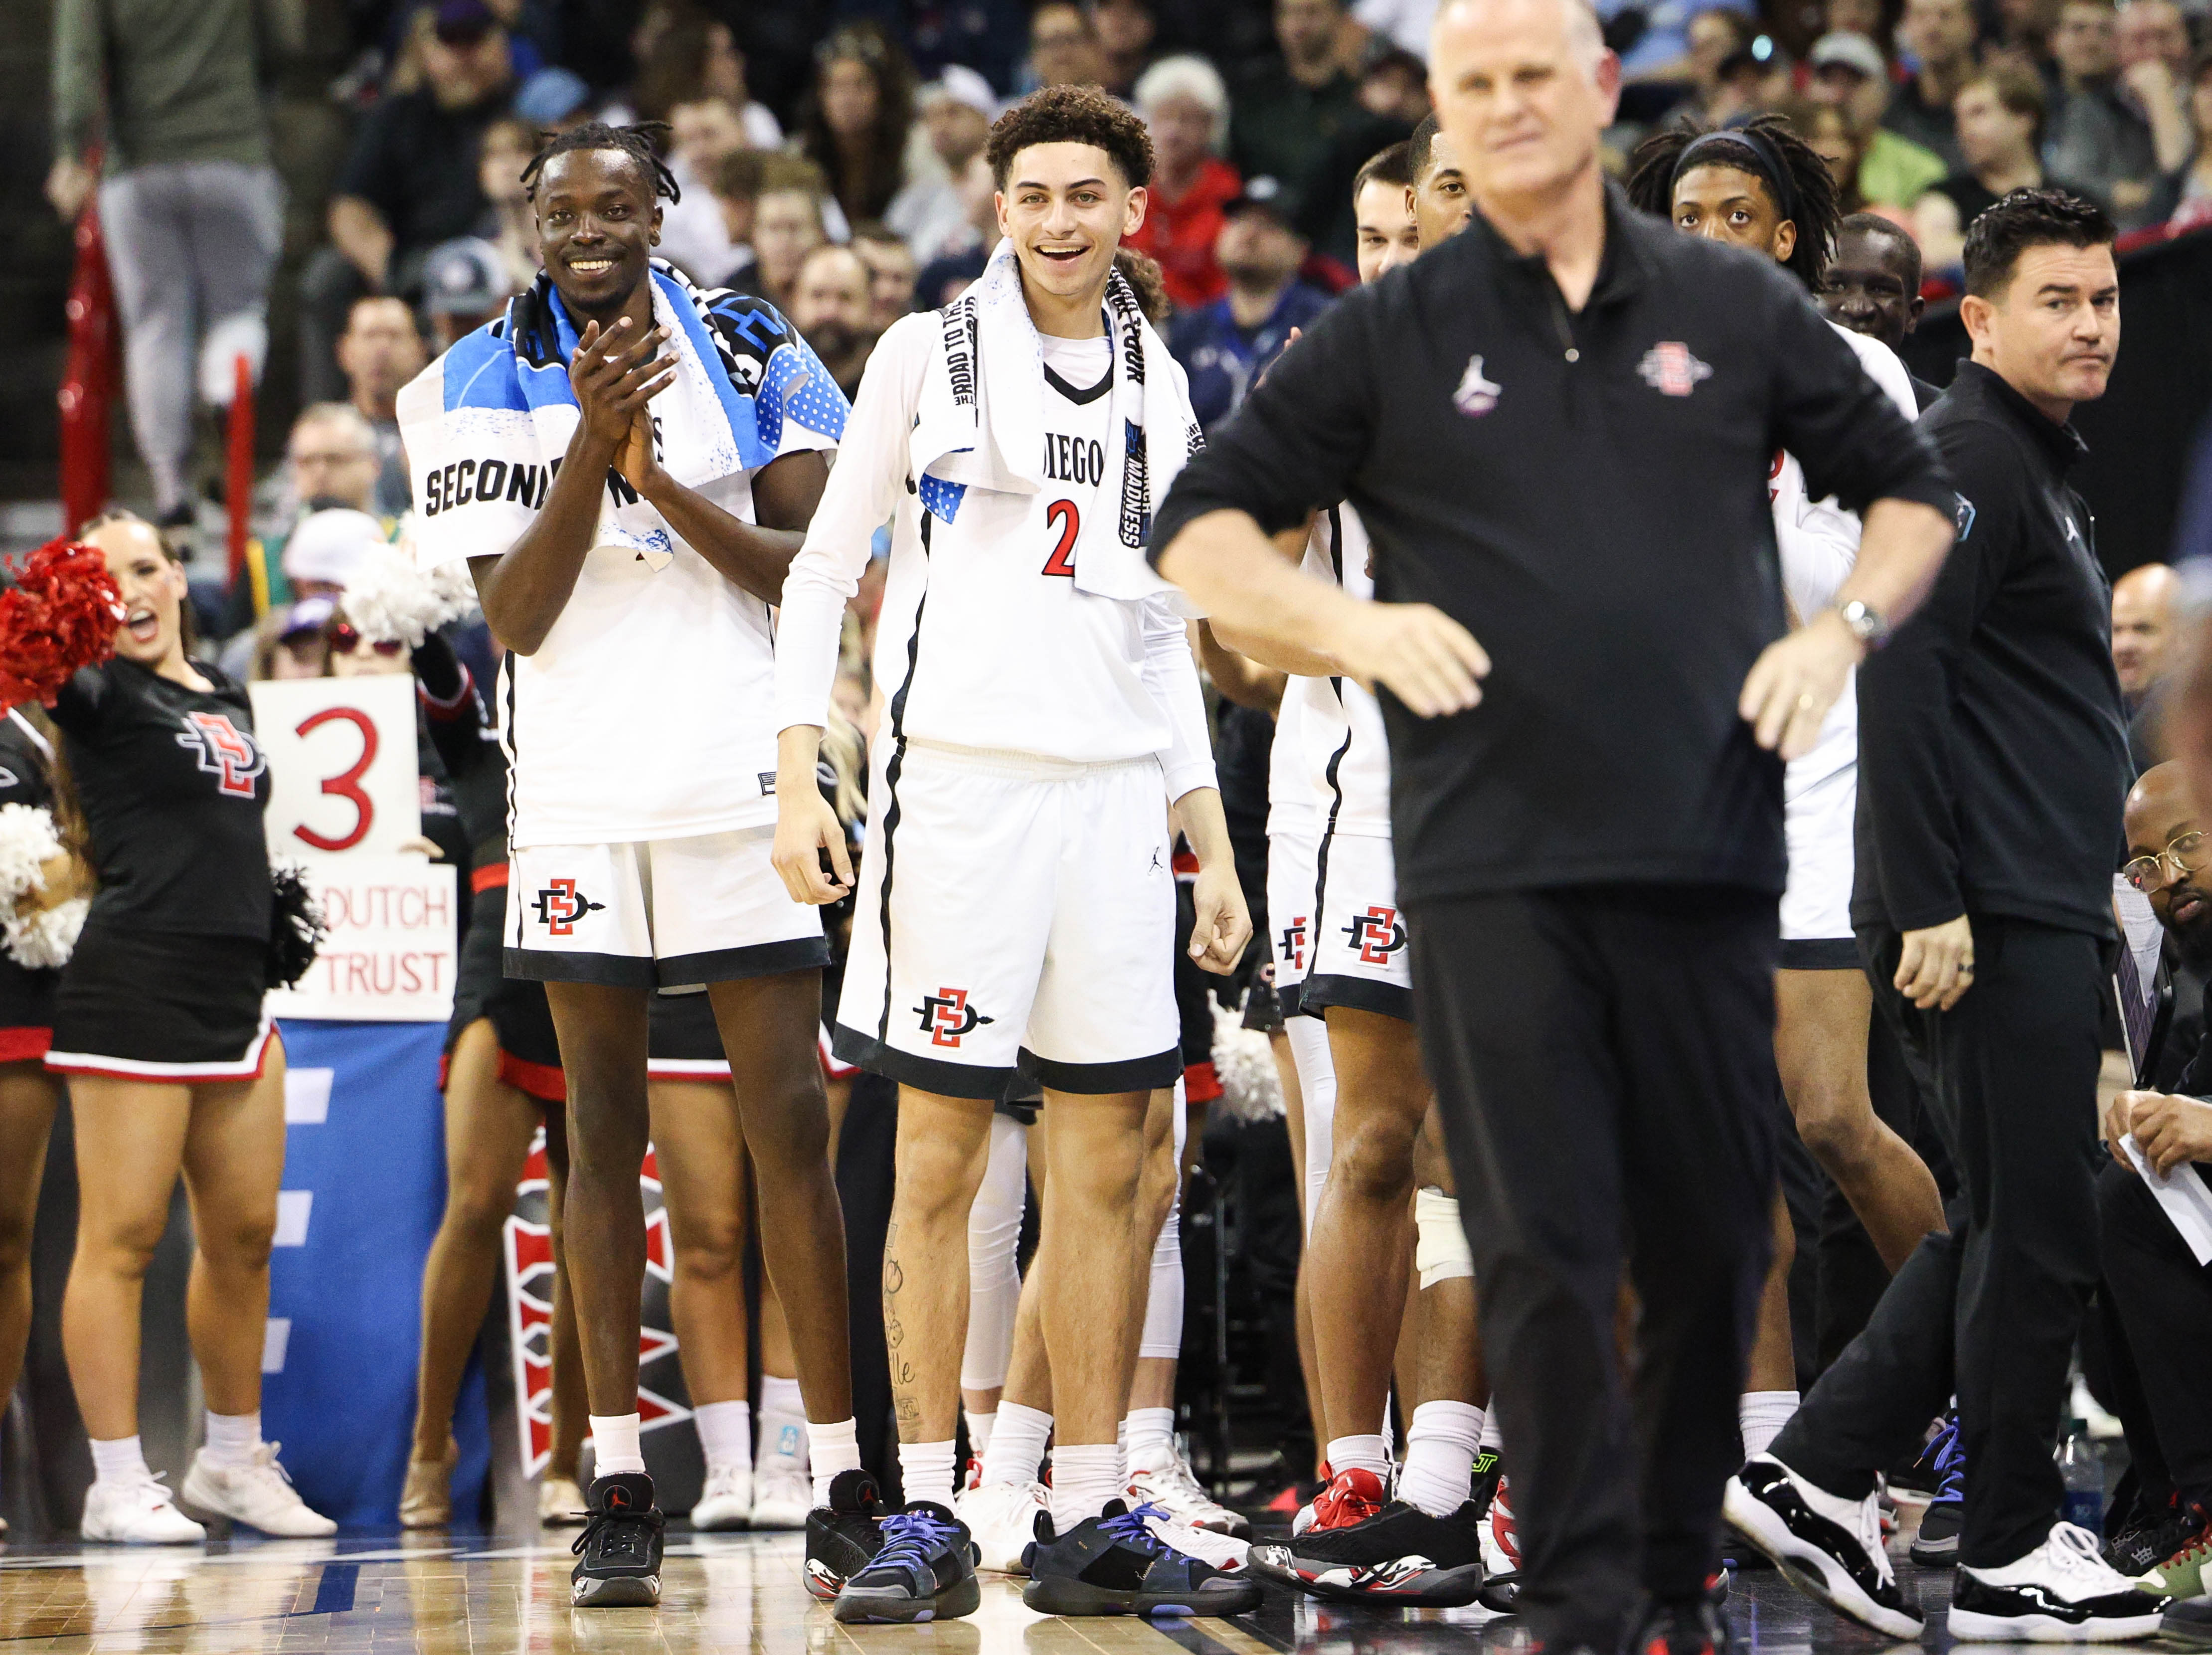 November basketball tournament could mean big money for San Diego State's NIL program